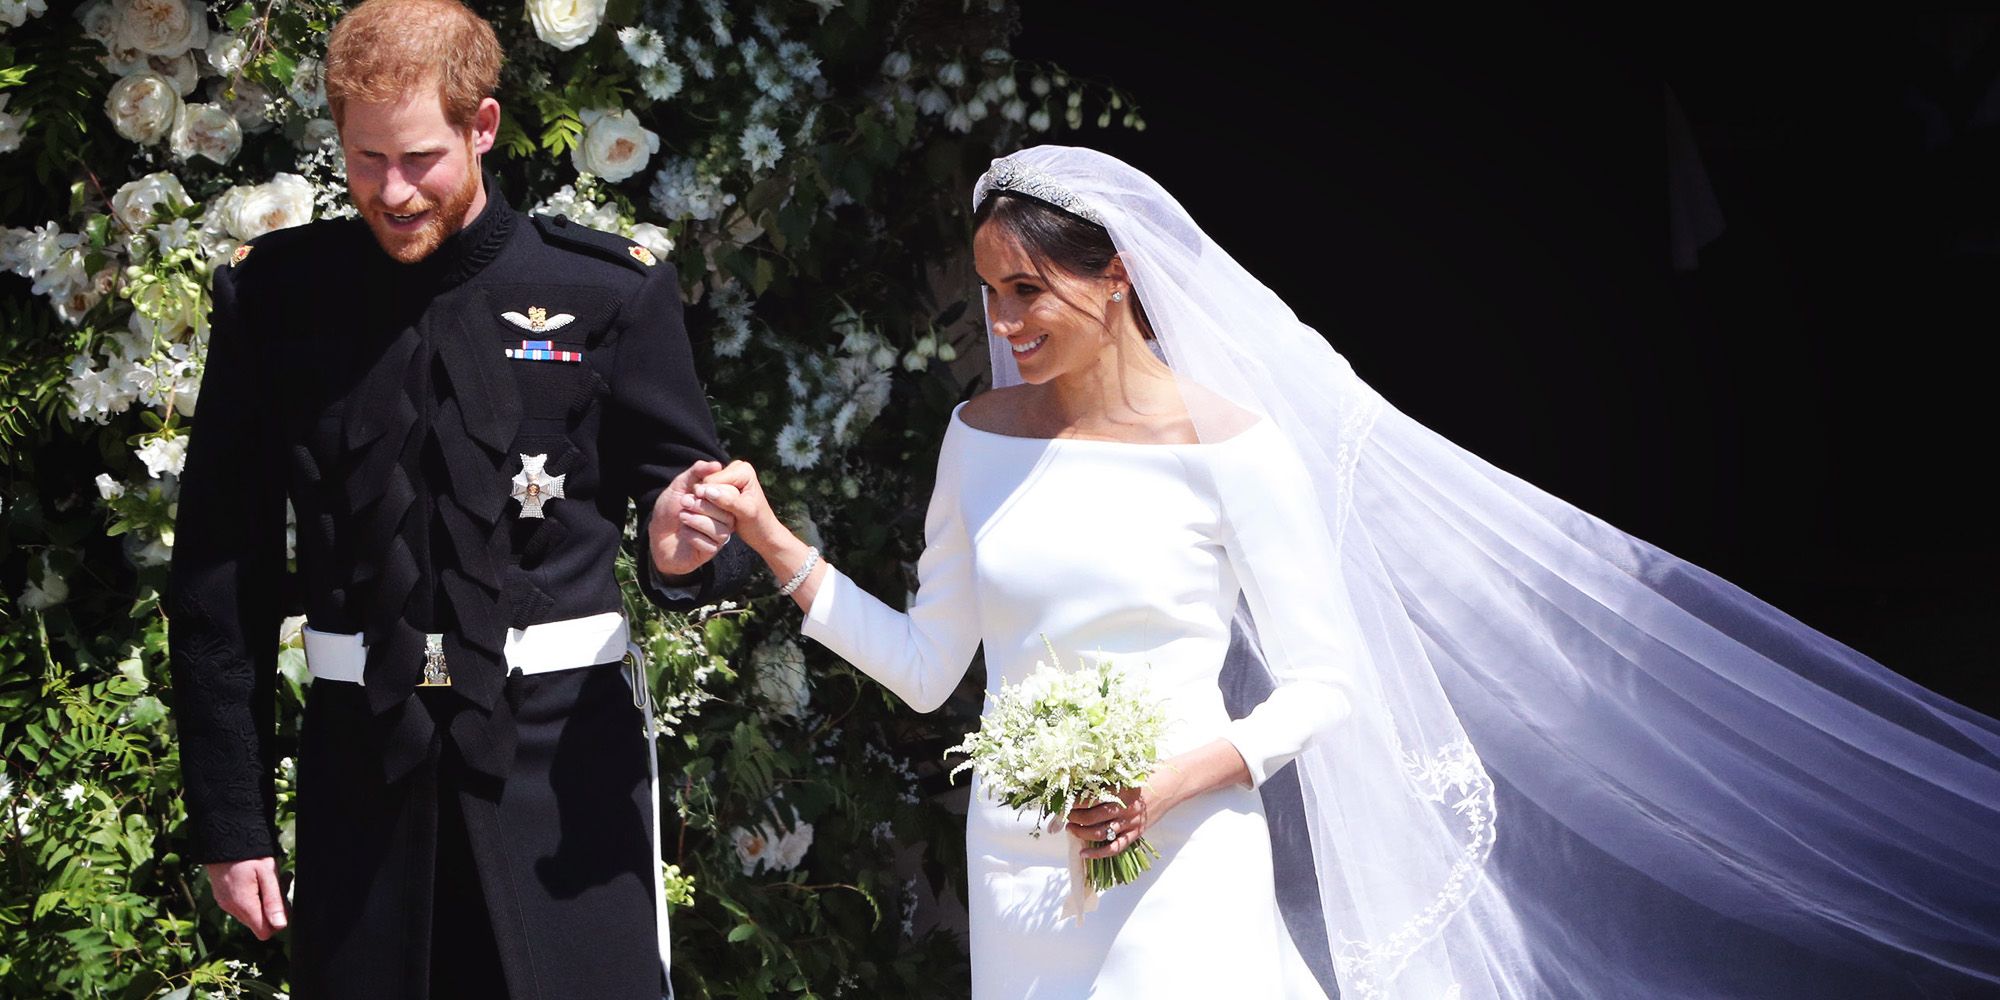 Meghan Markle Wedding Dress Replicas Are Here - Copycat Royal Wedding Gowns